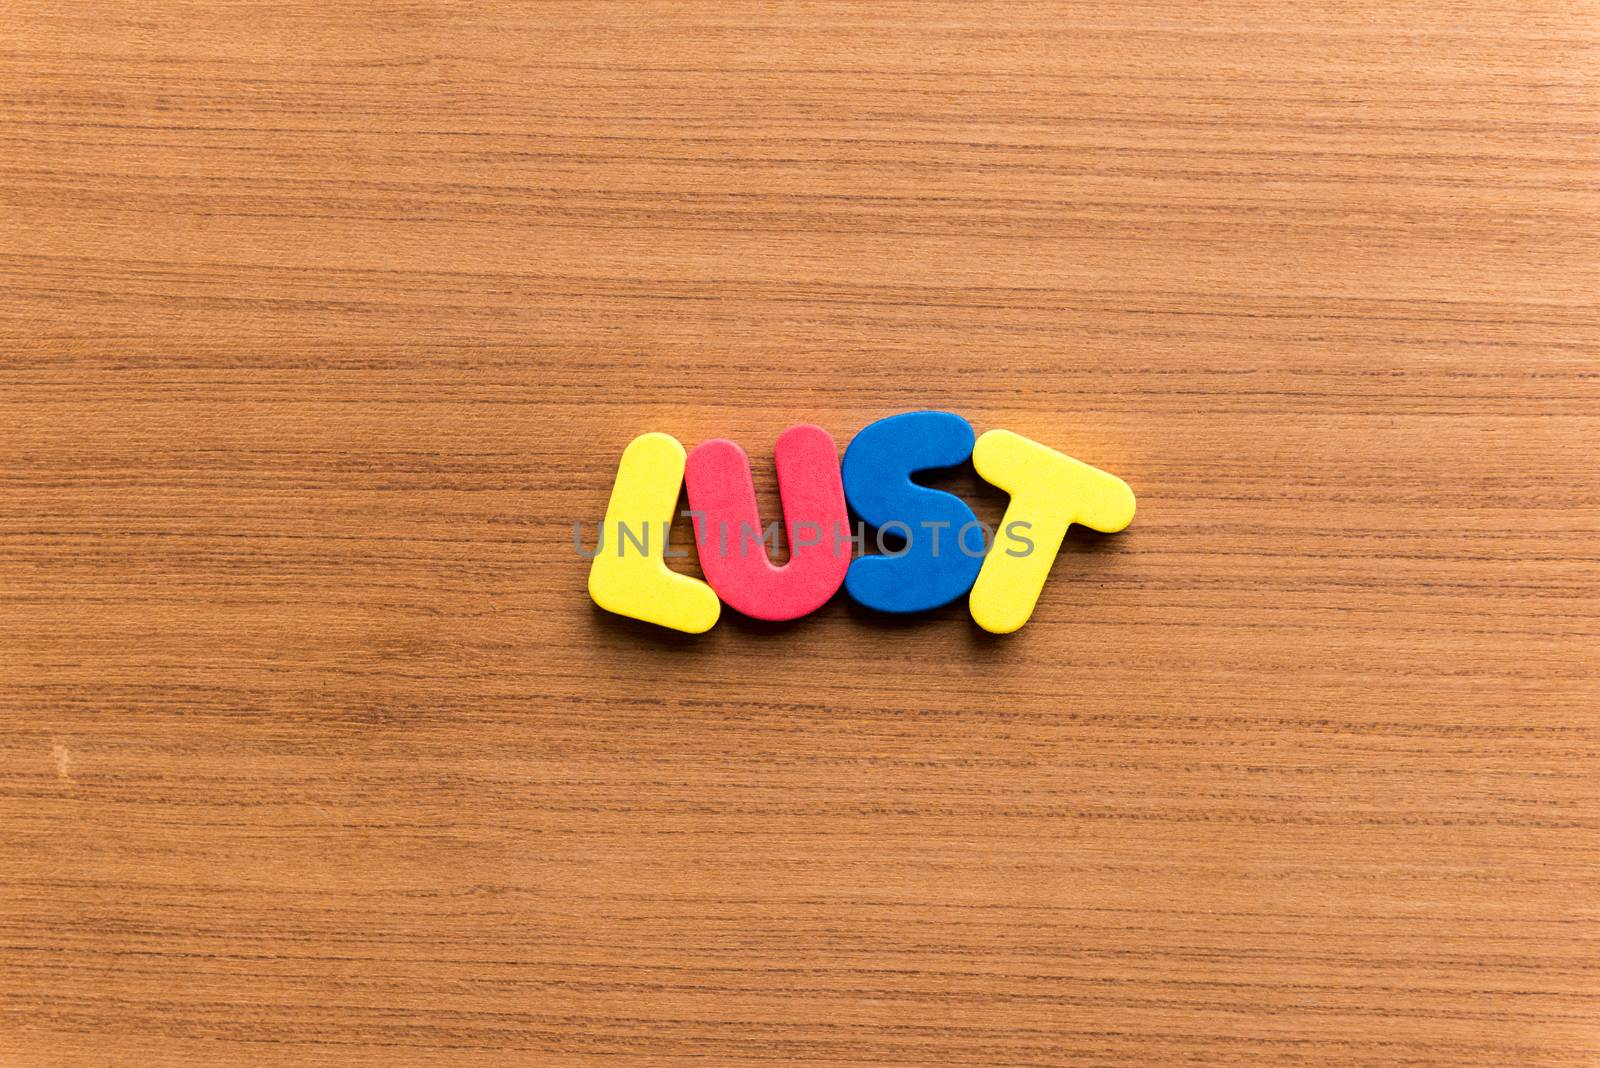 lust colorful word on the wooden background